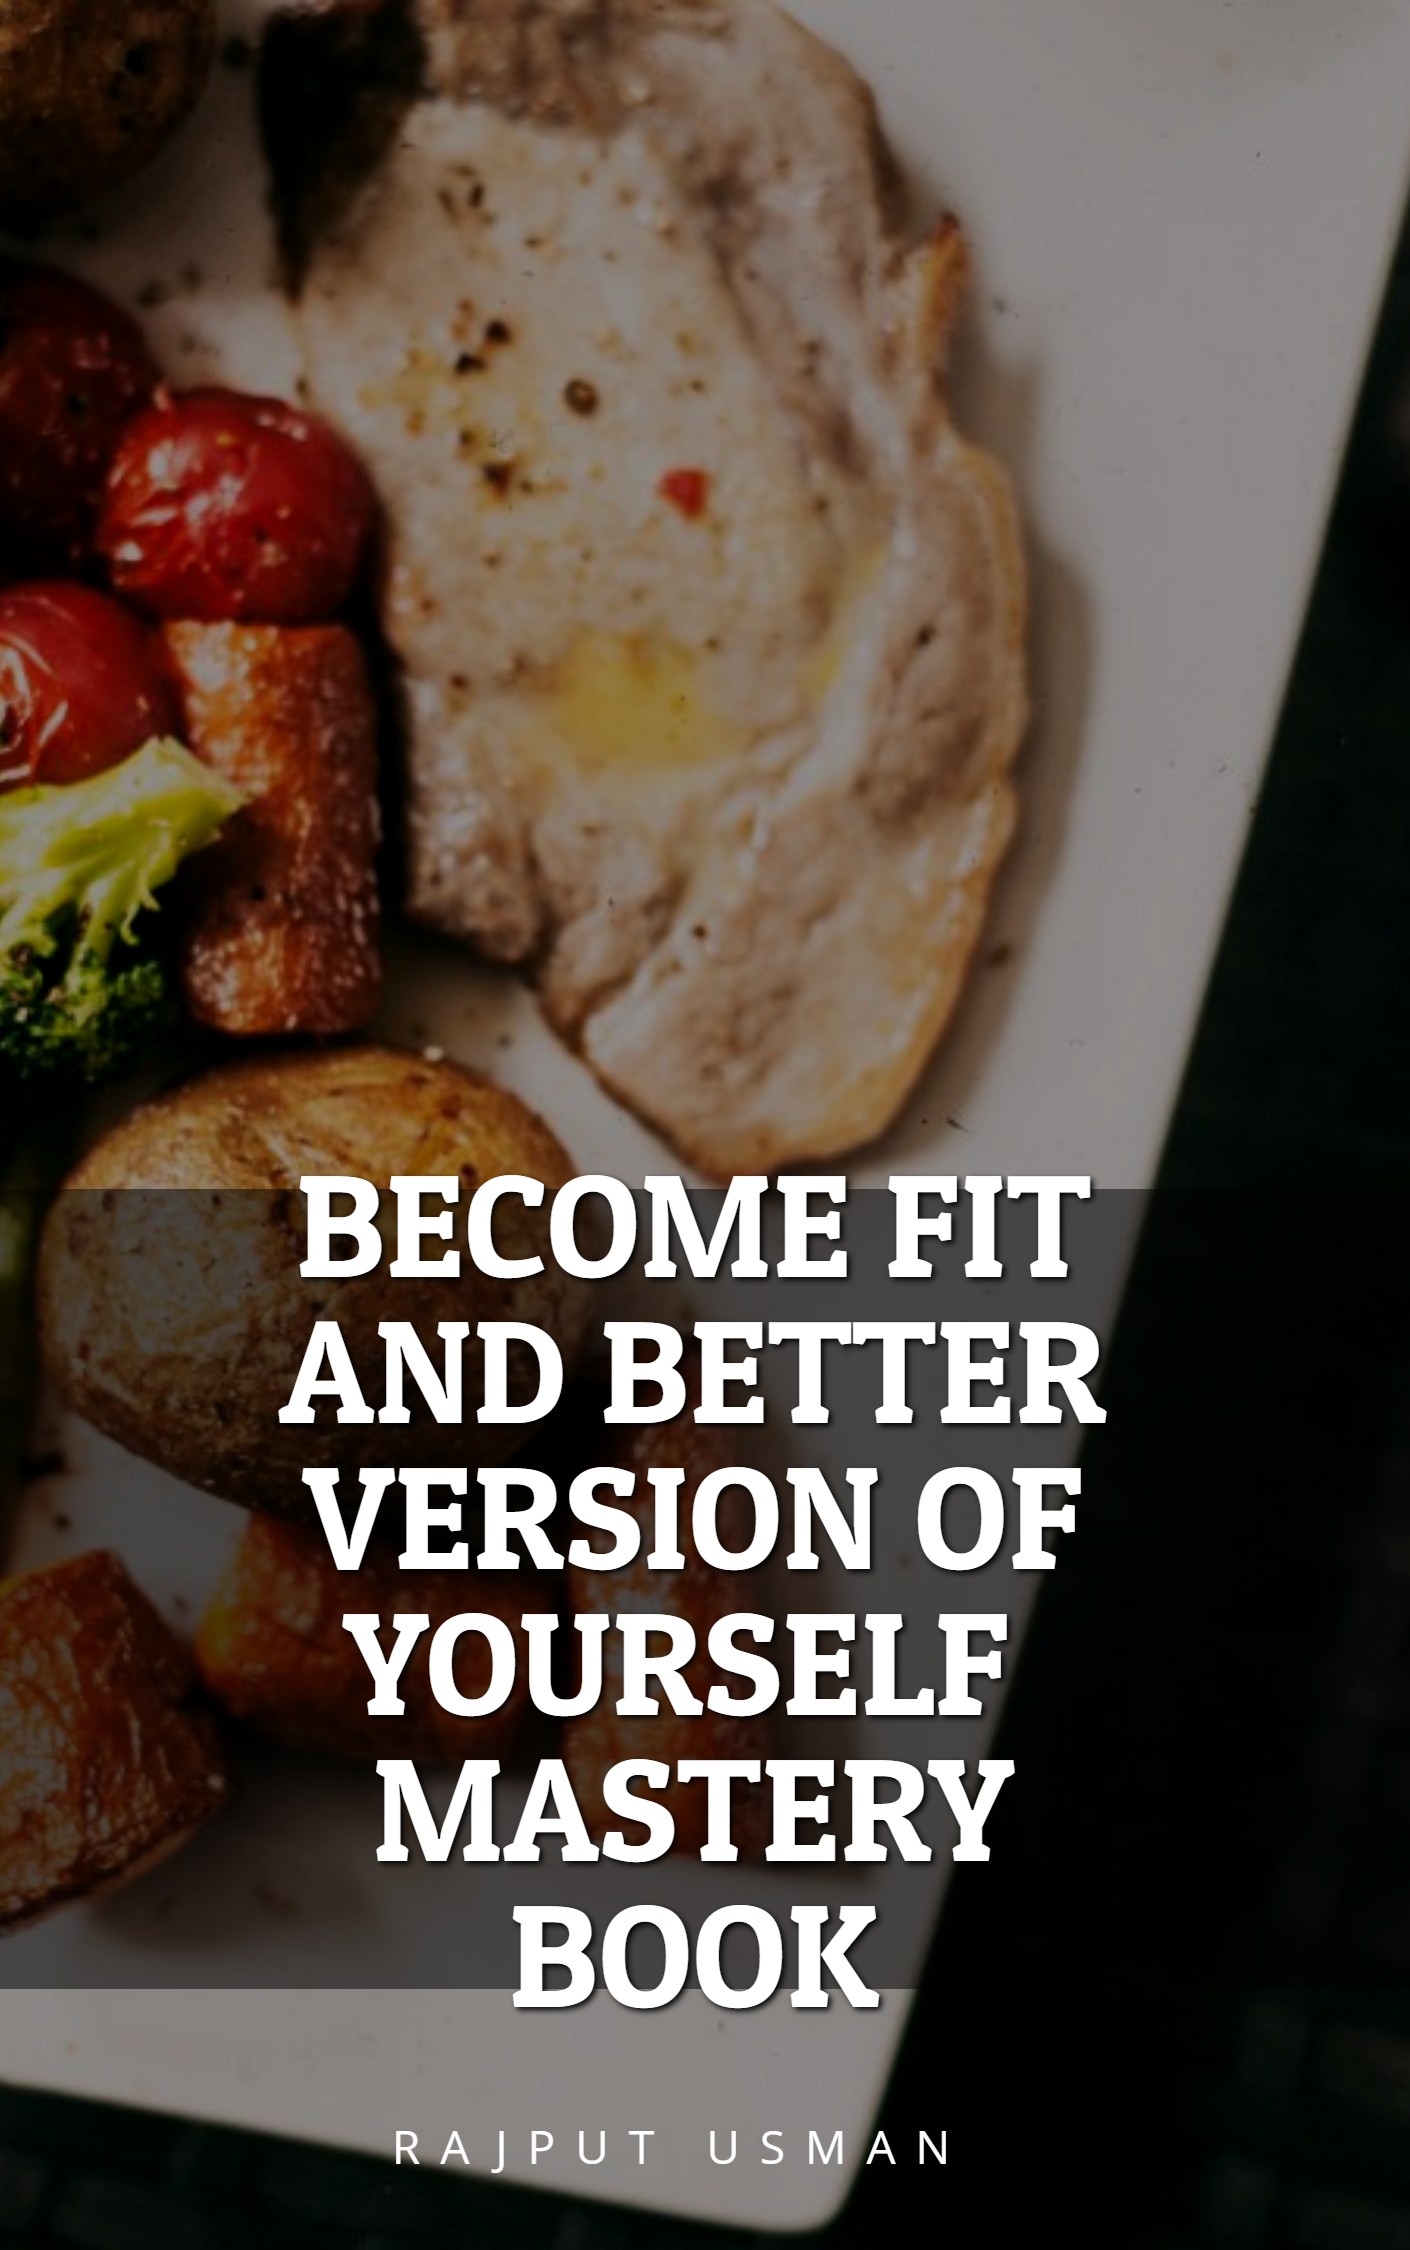 FREE: BECOME FIT AND BETTER VERSION OF YOURSELF COMPLETE MASTERY by rajput usman